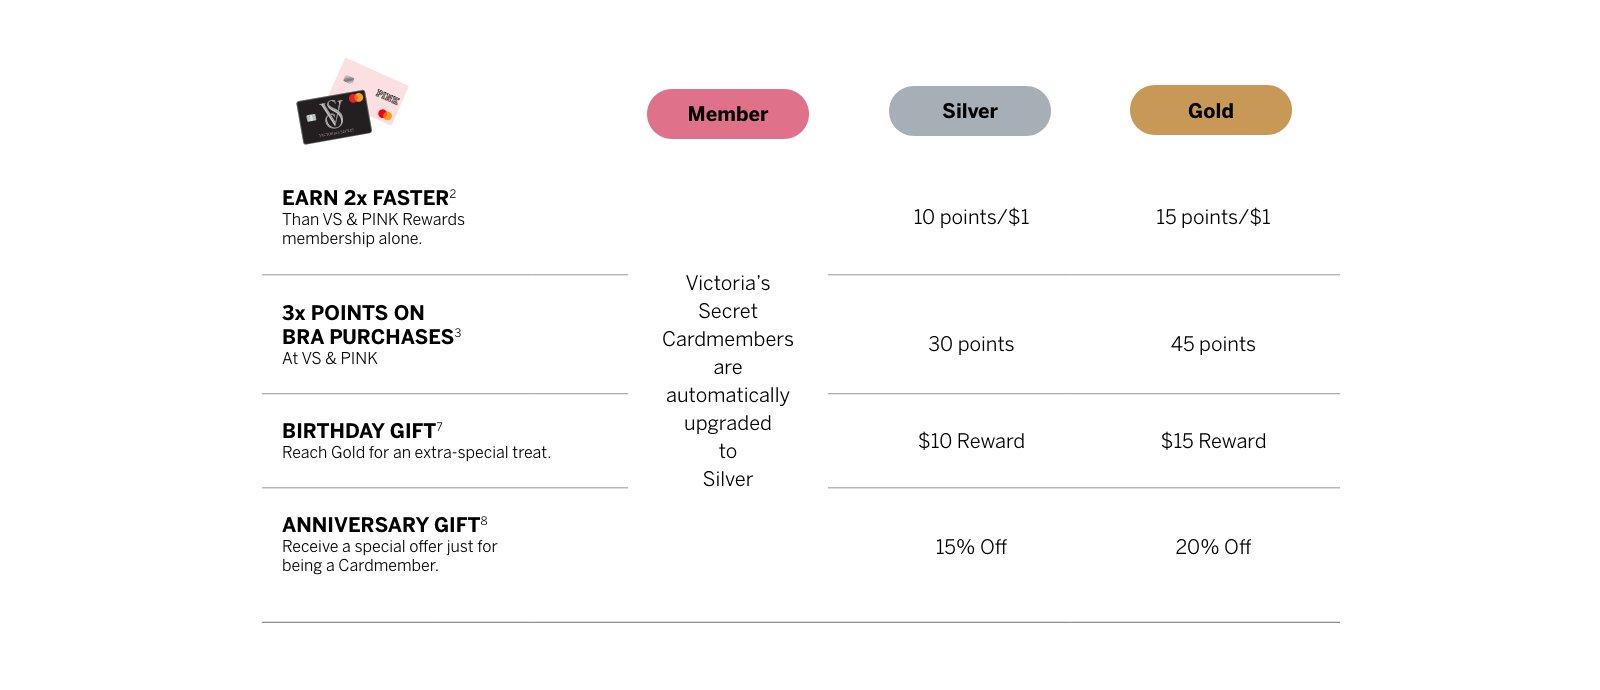 Victorias Secret Credit Cardmember Exclusive Perks. Get all the benefits above, PLUS all the benefits below when you use a Victorias Secret Credit Card at Victorias Secret and PINK.